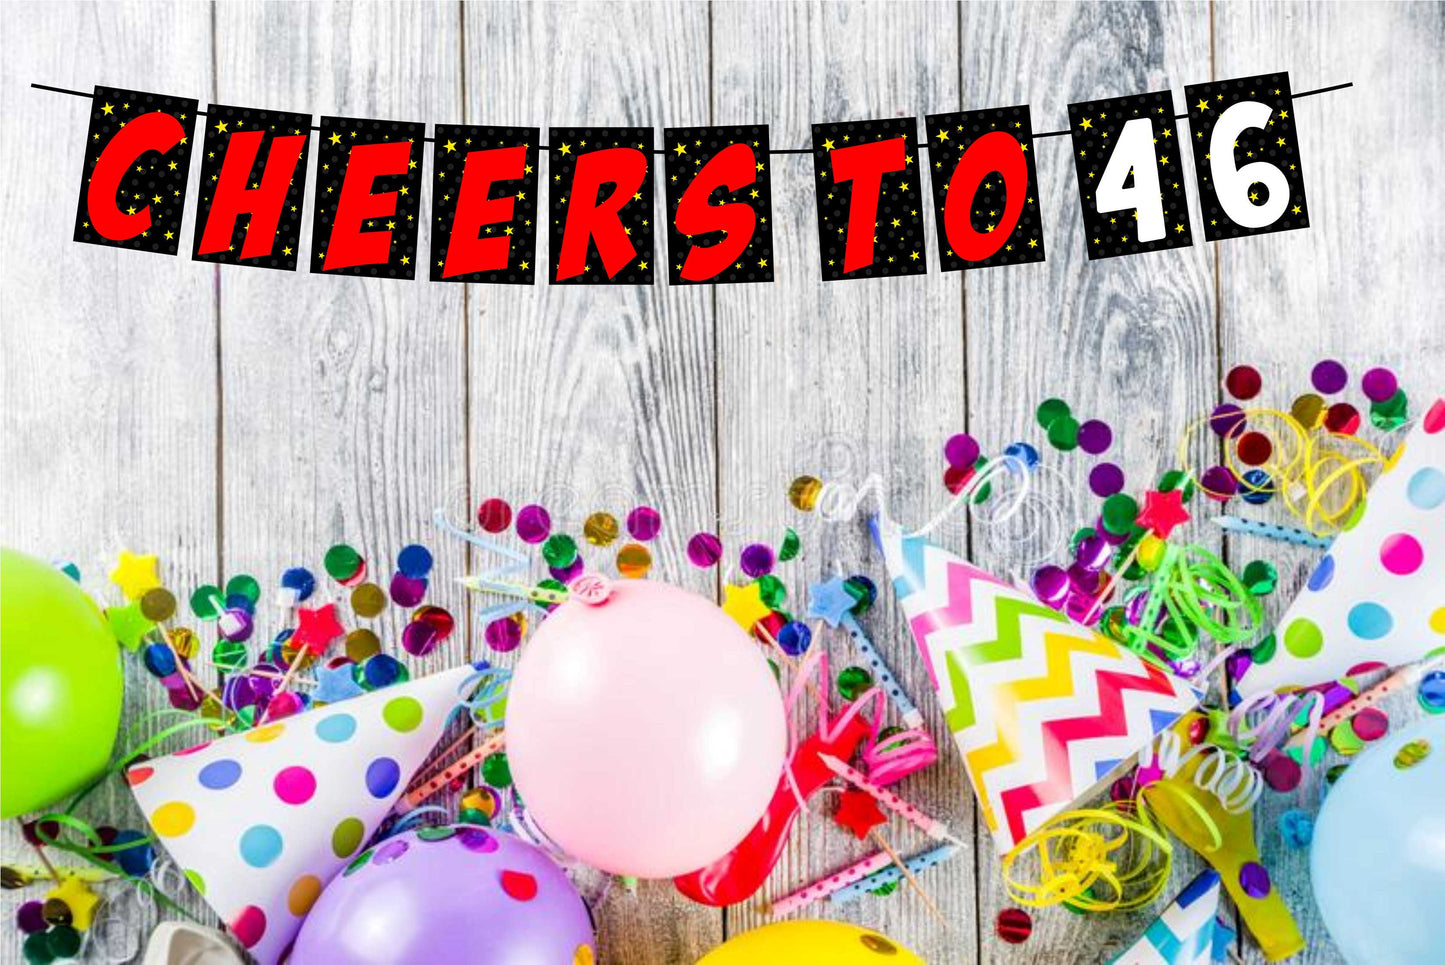 Cheers to 46 Birthday Banner for Photo Shoot Backdrop and Theme Party